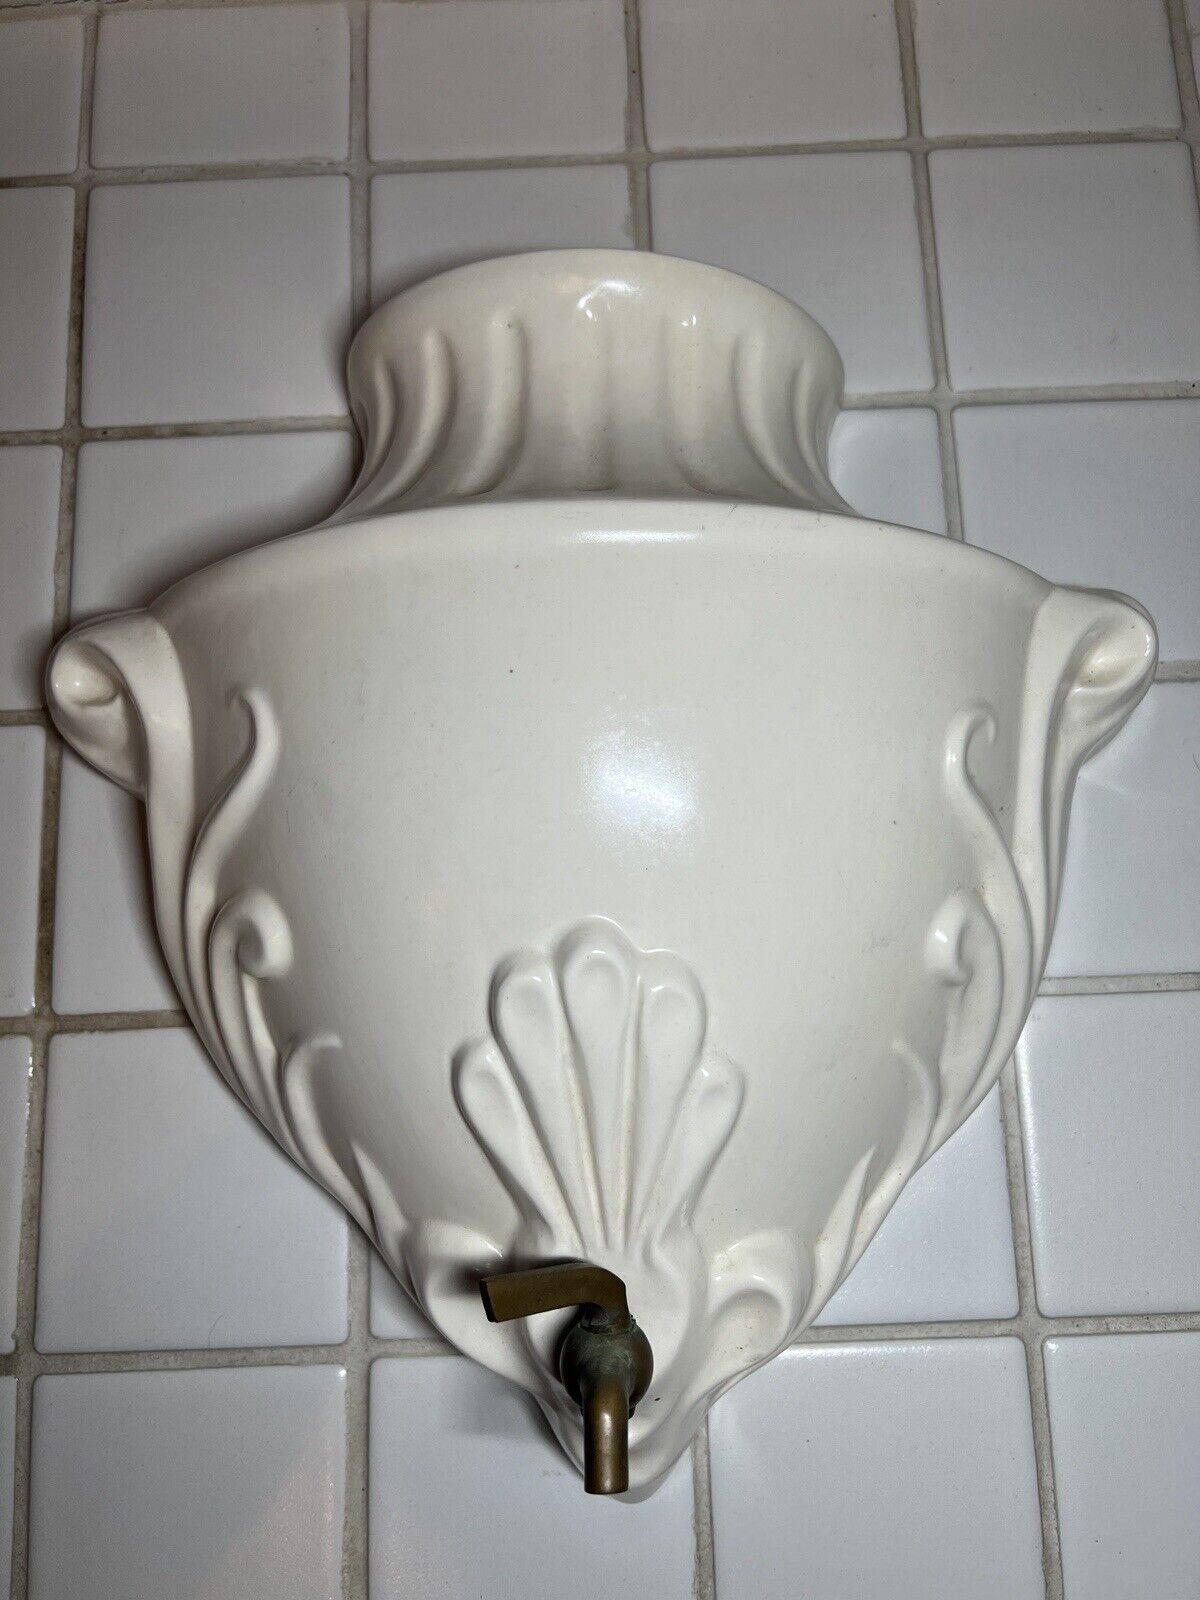 Large Elegant Vintage White Lavabo Wall Fountain Design Made In Italy